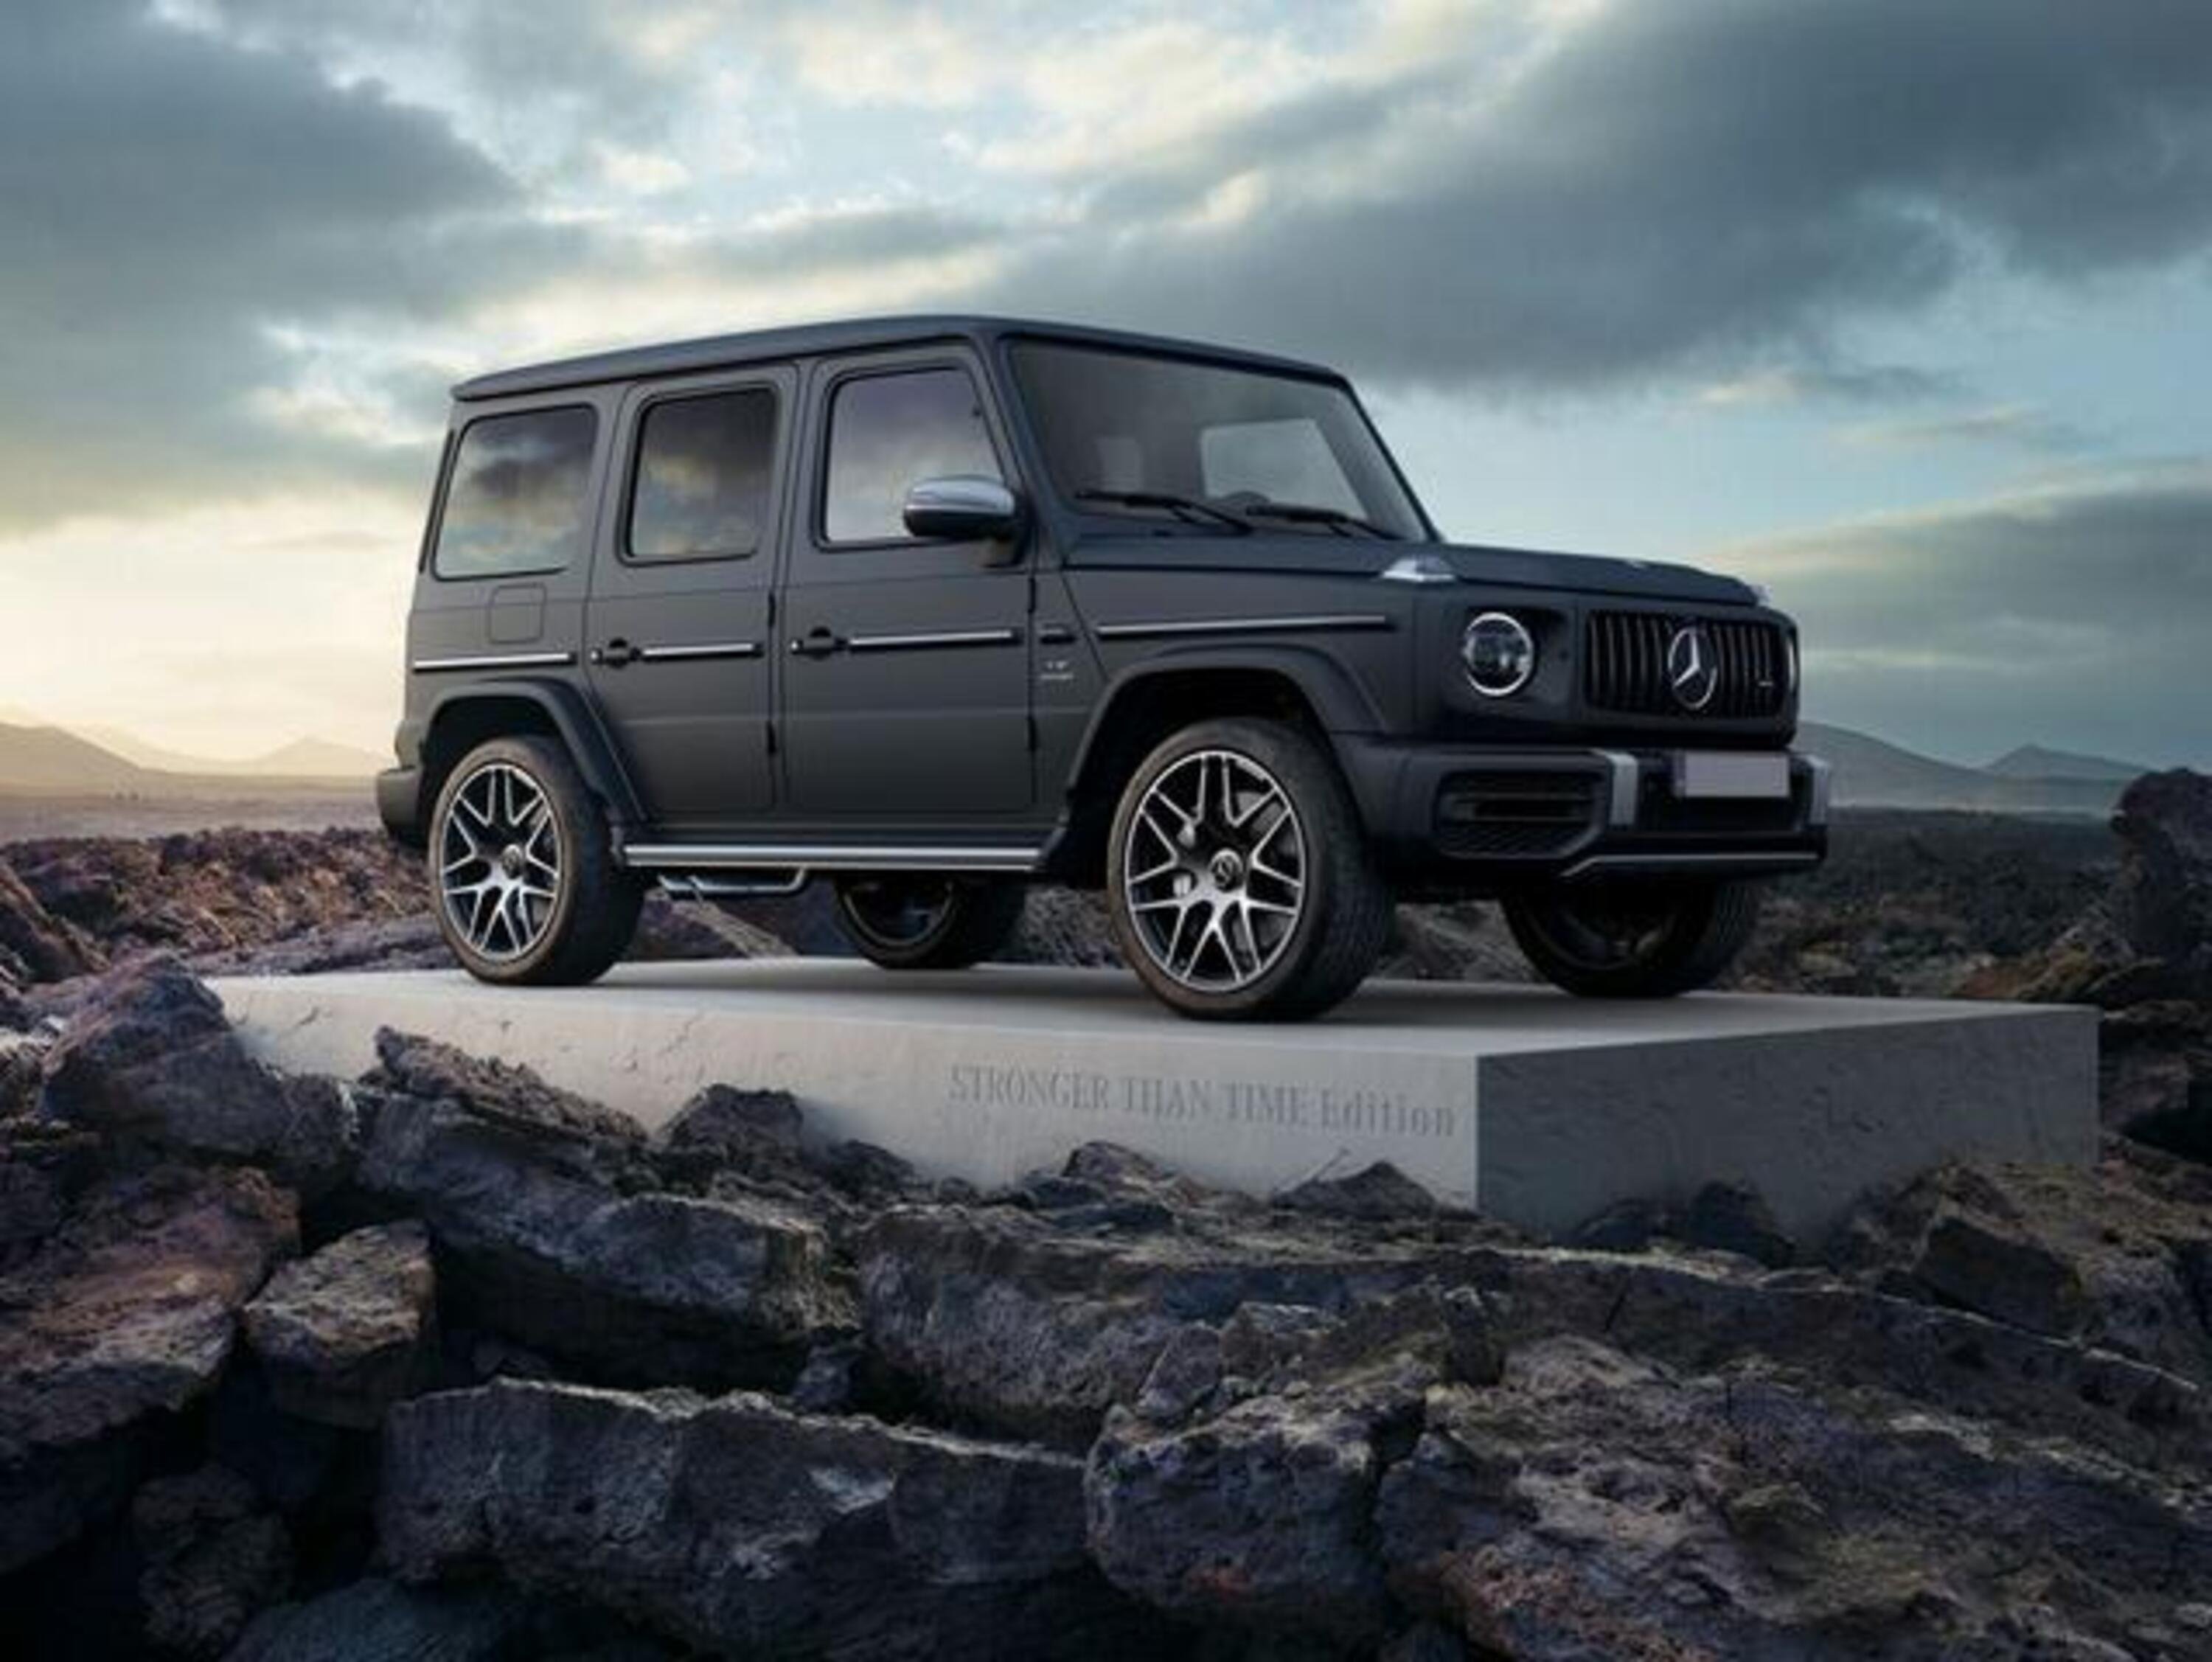 Mercedes-Benz Classe G 400 d Stronger Than Time Edition